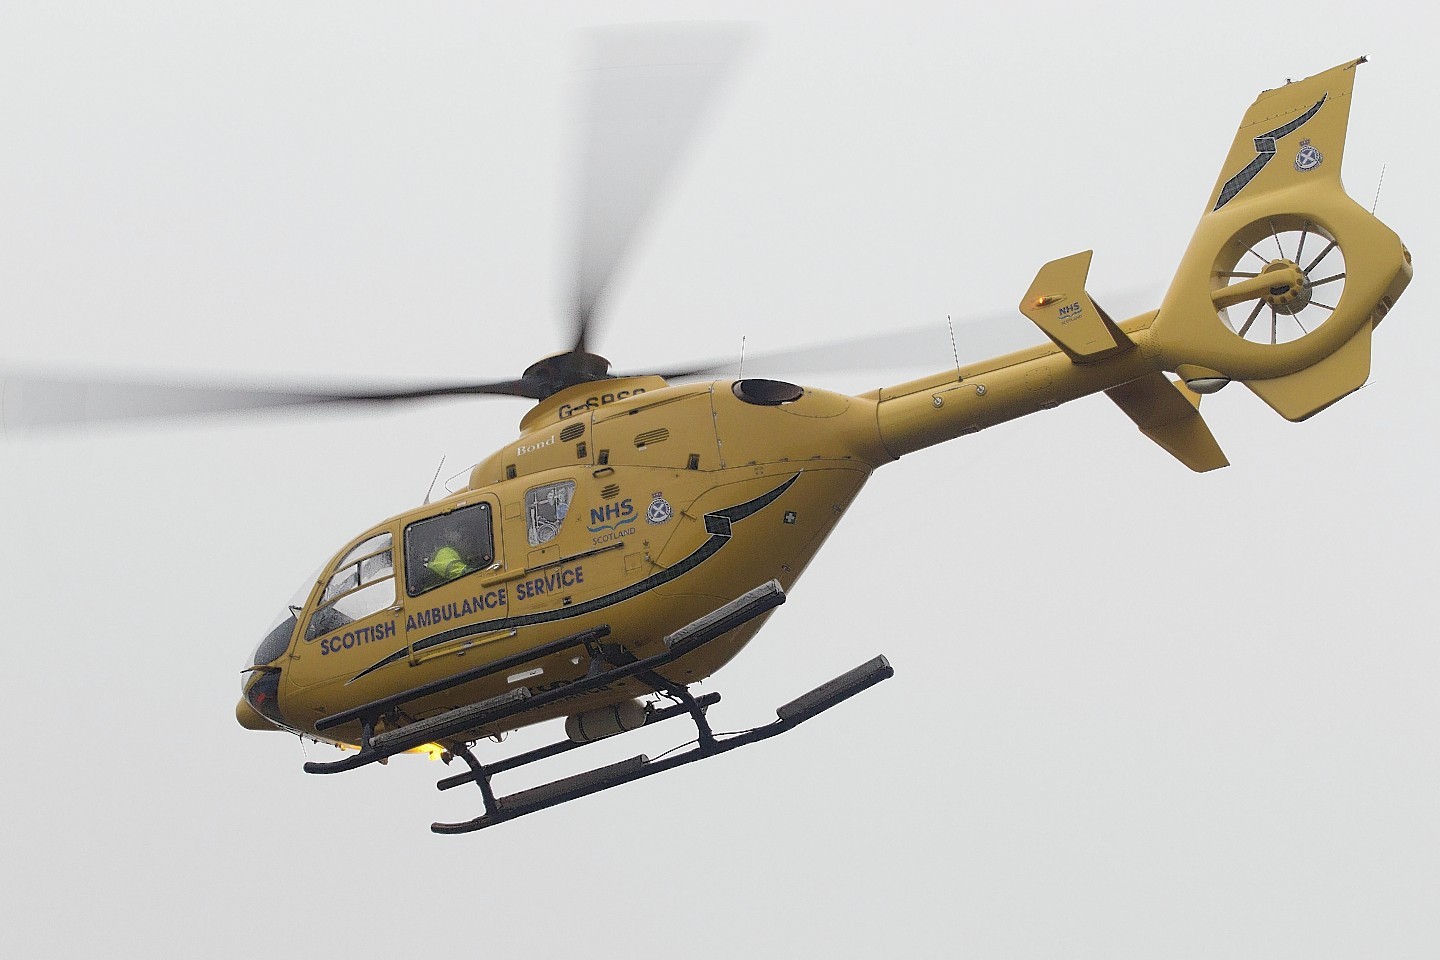 Two people have been airlifted after a plane crash in Argyll